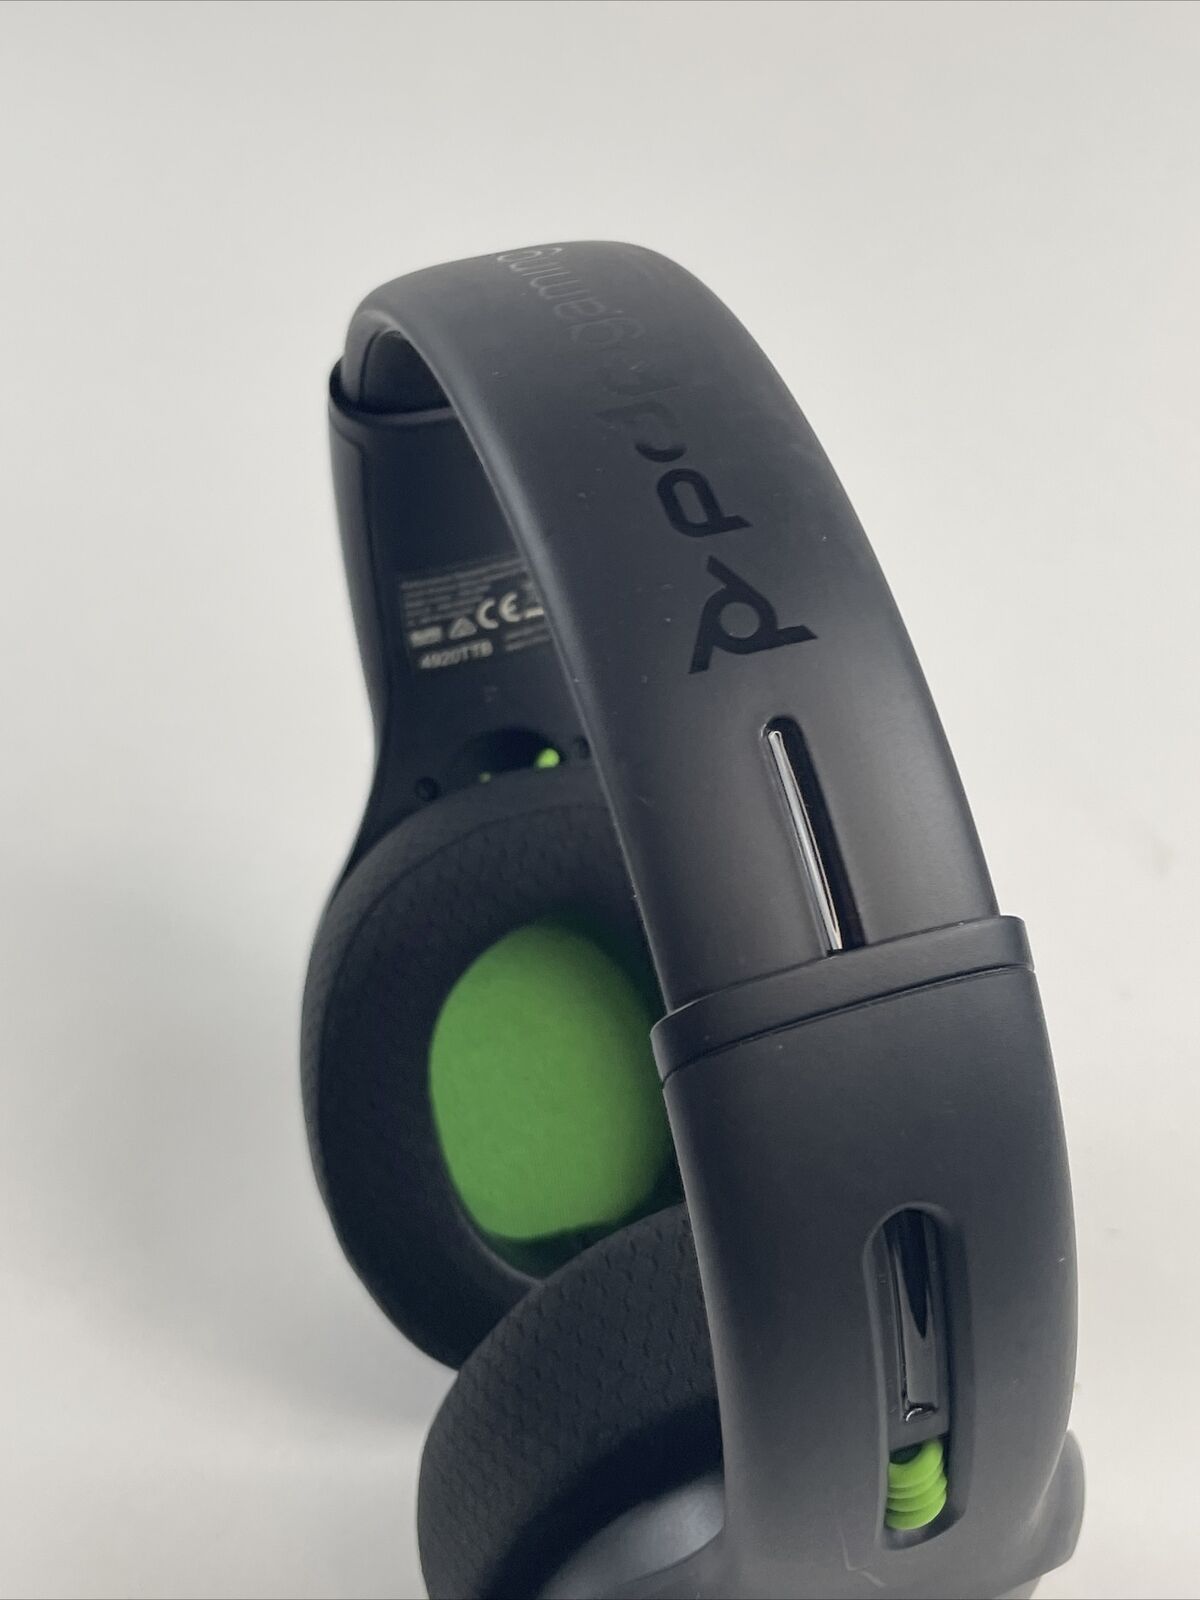 PDP LvL50 Wireless Gaming Headset for Xbox One Review